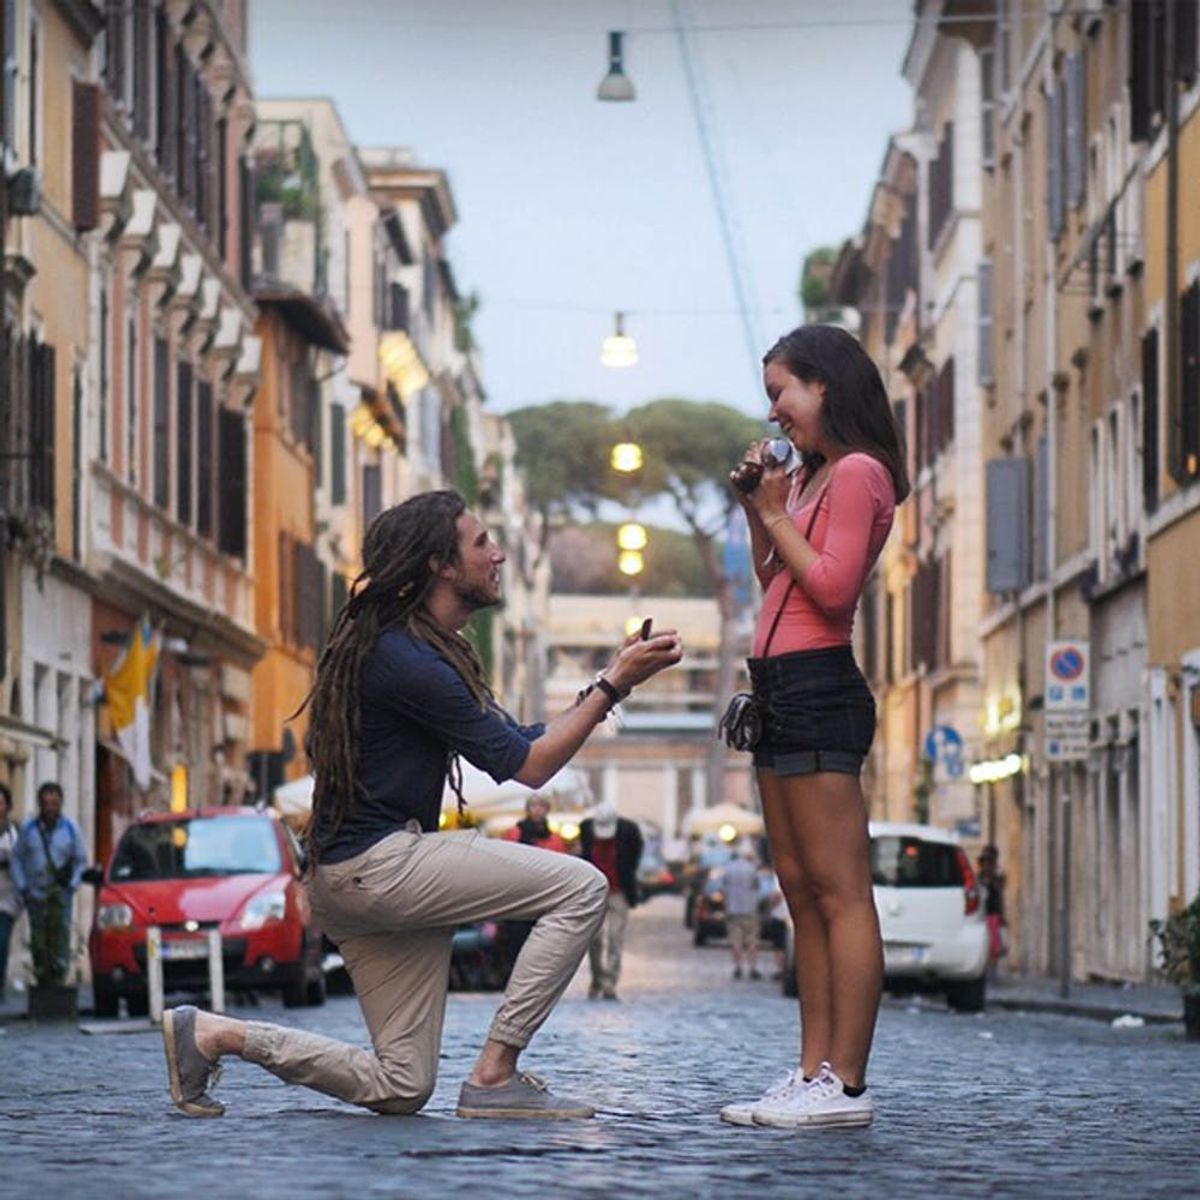 Fiancé of the Year Honors Girlfriend’s Late Father in This Sweet Proposal Video